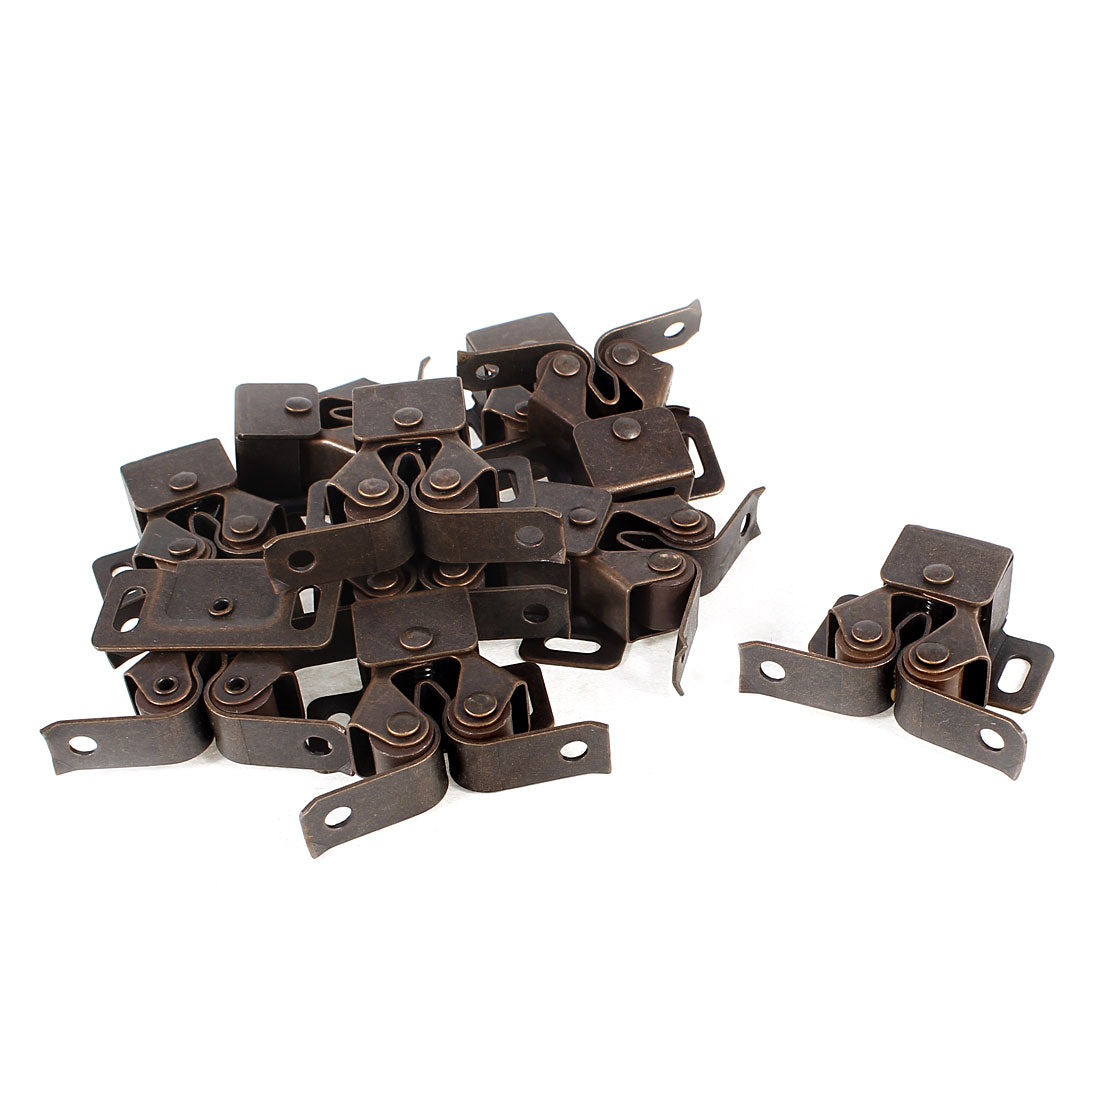 uxcell Uxcell 10pcs 30mm x 36mm x 13mm Copper Tone Cabinet Door Ball Latch Catch Replacement